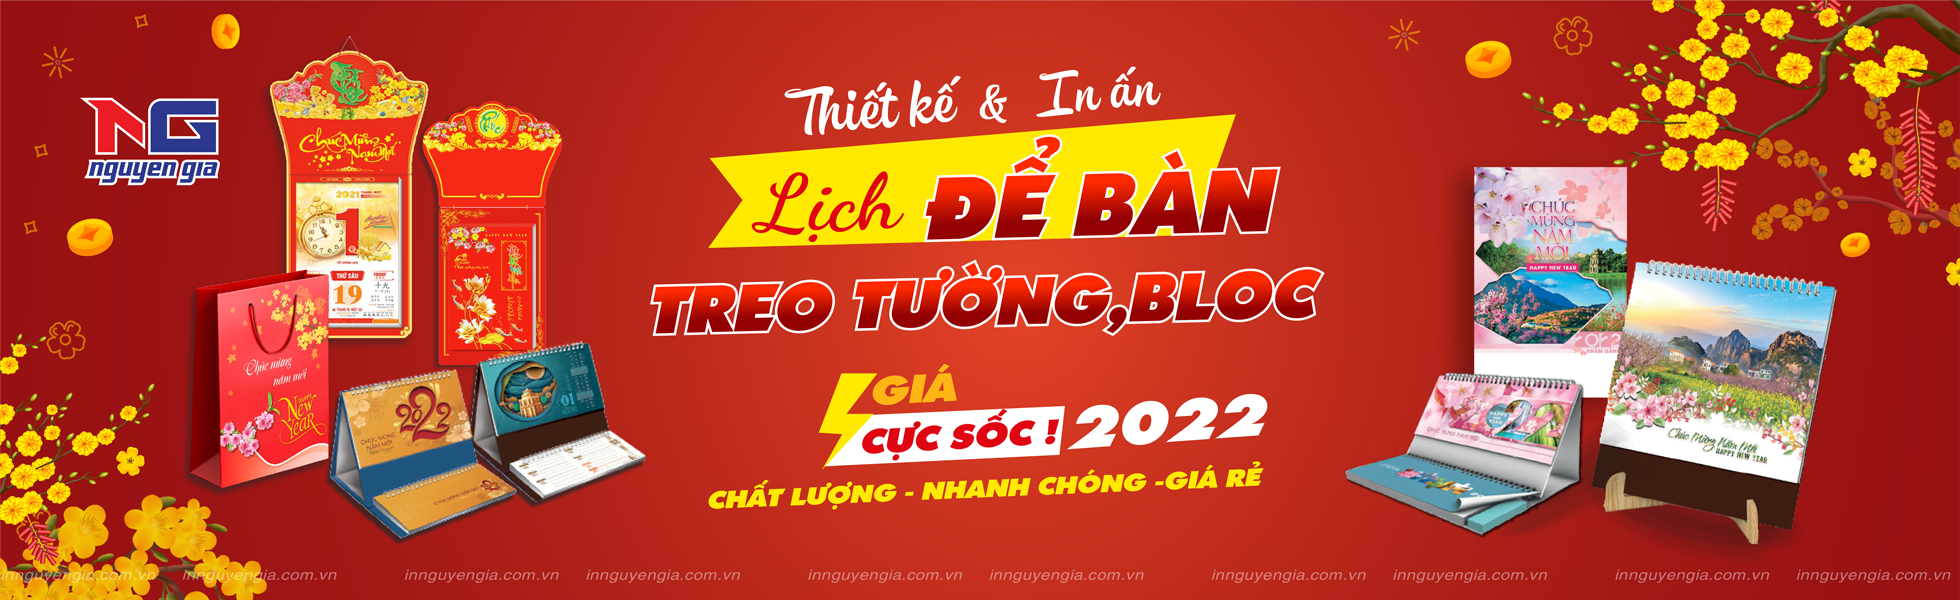 In lịch tết